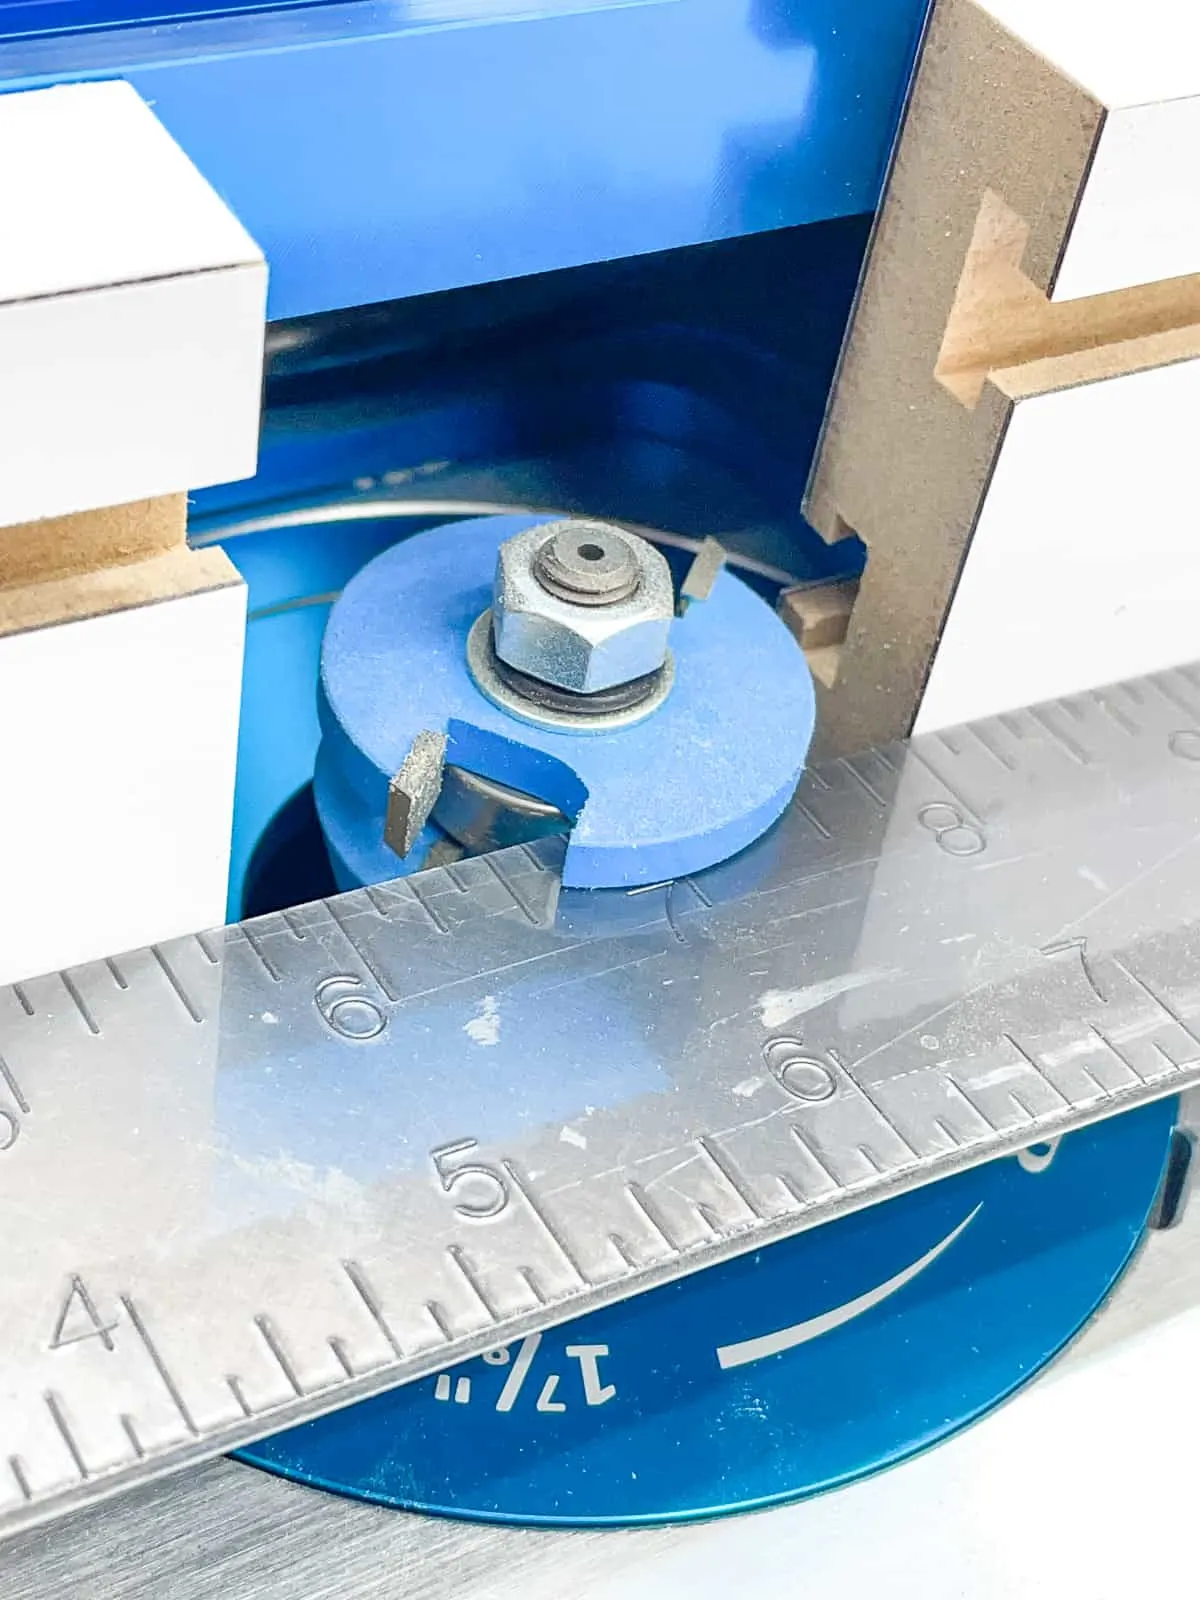 checking the position of the router table fence with a metal ruler